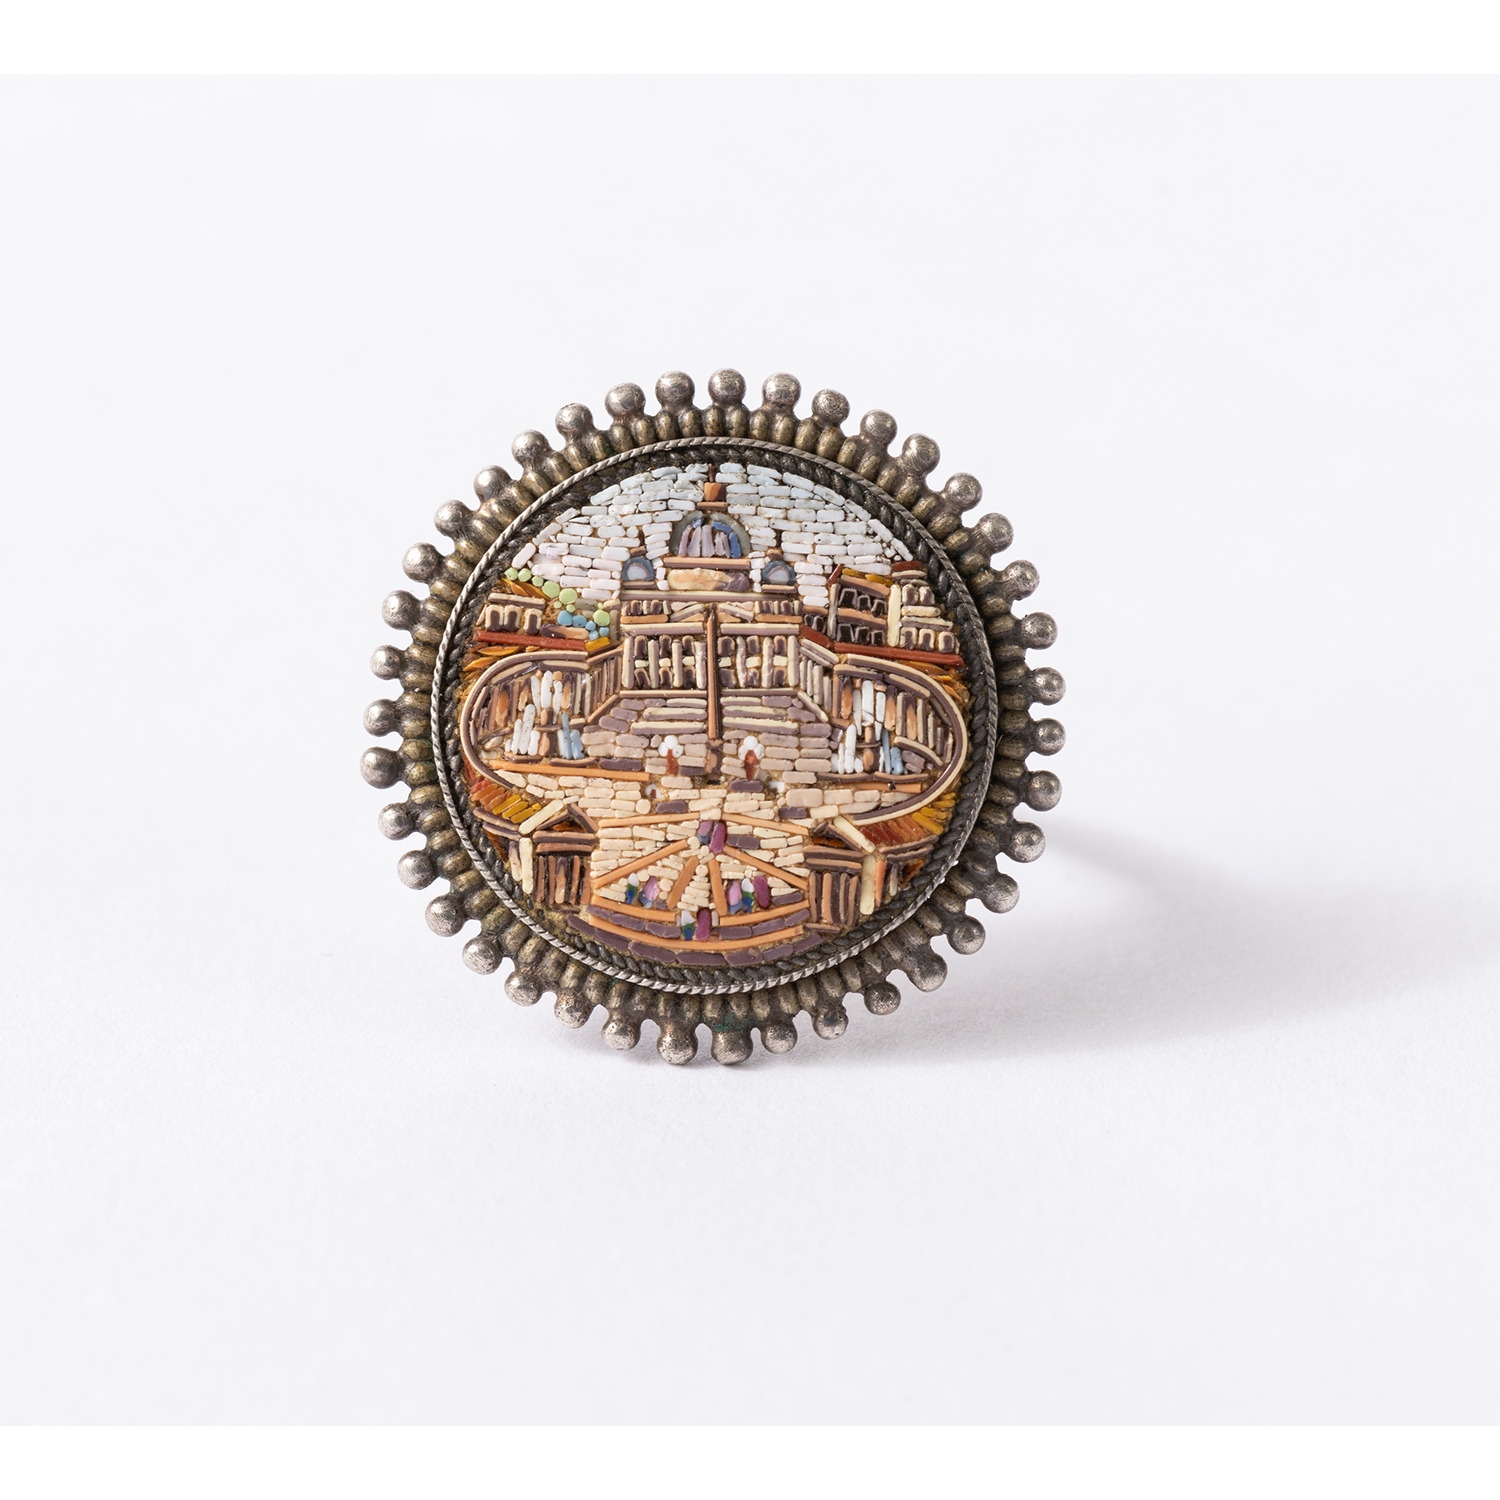 UNIQUE RING WITH A CIRCULAR BROOCHE BORDERED WITH SILVER PEARLS REPRESENTING SAINT PETER OF ROME INSERTED WITH MICROMOSAIC